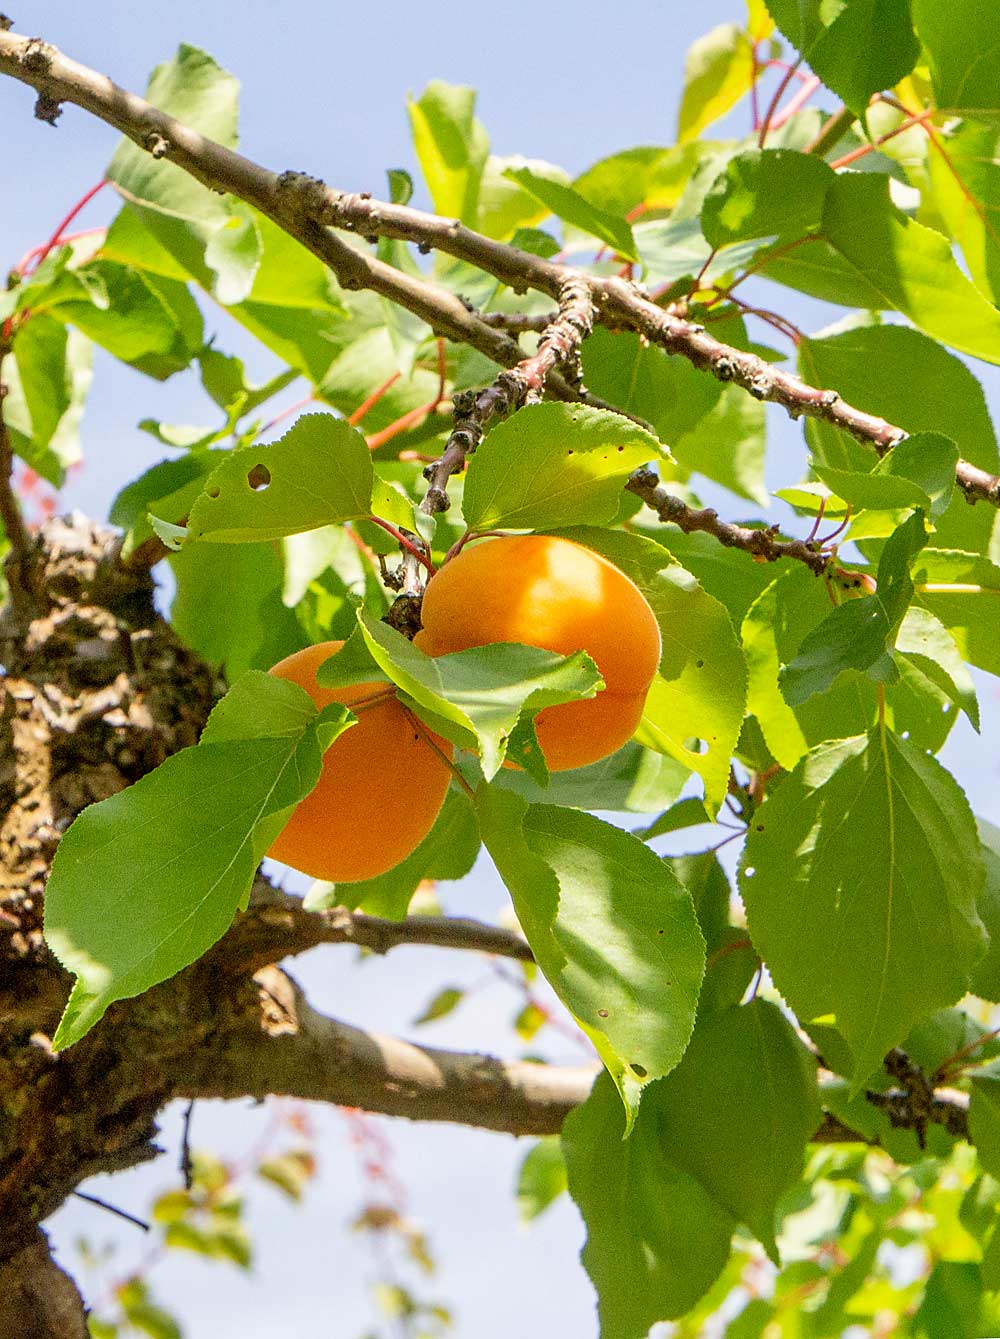 While the Perfections are sent to the wholesale market, these Goldstrike apricots develop a red blush where they are grown right along the river’s edge. Orchard manager Miguel Madrigal said he lets the fruit ripen on the tree longer to develop more flavor when destined for baked goods or brandy. (Kate Prengaman/Good Fruit Grower)